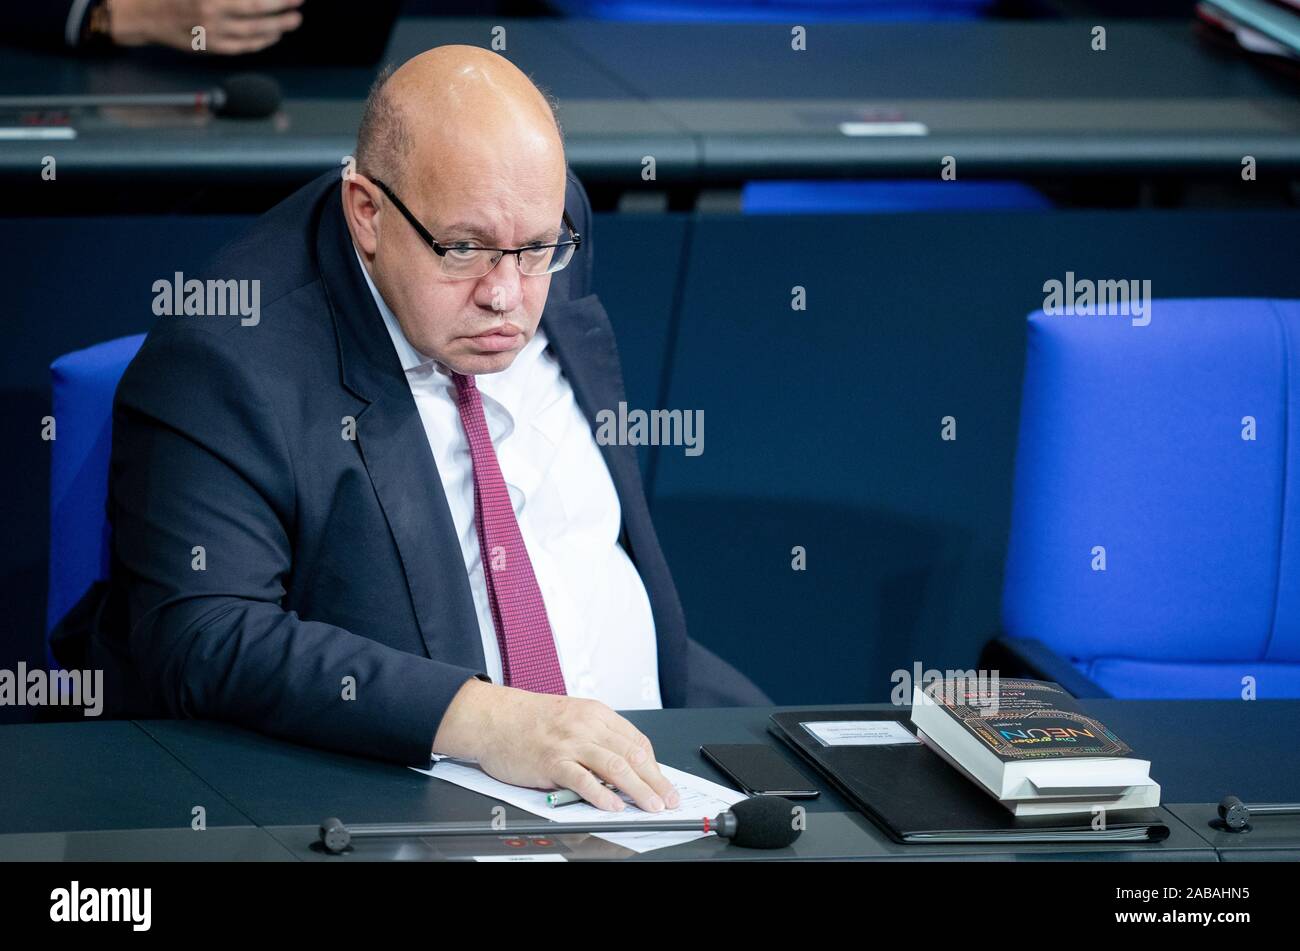 Berlin, Germany. 26th Nov, 2019. Peter Altmaier (CDU), Federal Minister of Economics and Energy, takes part in the debate on the Federal Budget 2020 in the Bundestag. Next to Altmaier is the book 'The Big Nine: How to Tame the Tech Titans and Develop Artificial Intelligence for the Benefit of All' by Amy Webb. Credit: Kay Nietfeld/dpa/Alamy Live News Stock Photo